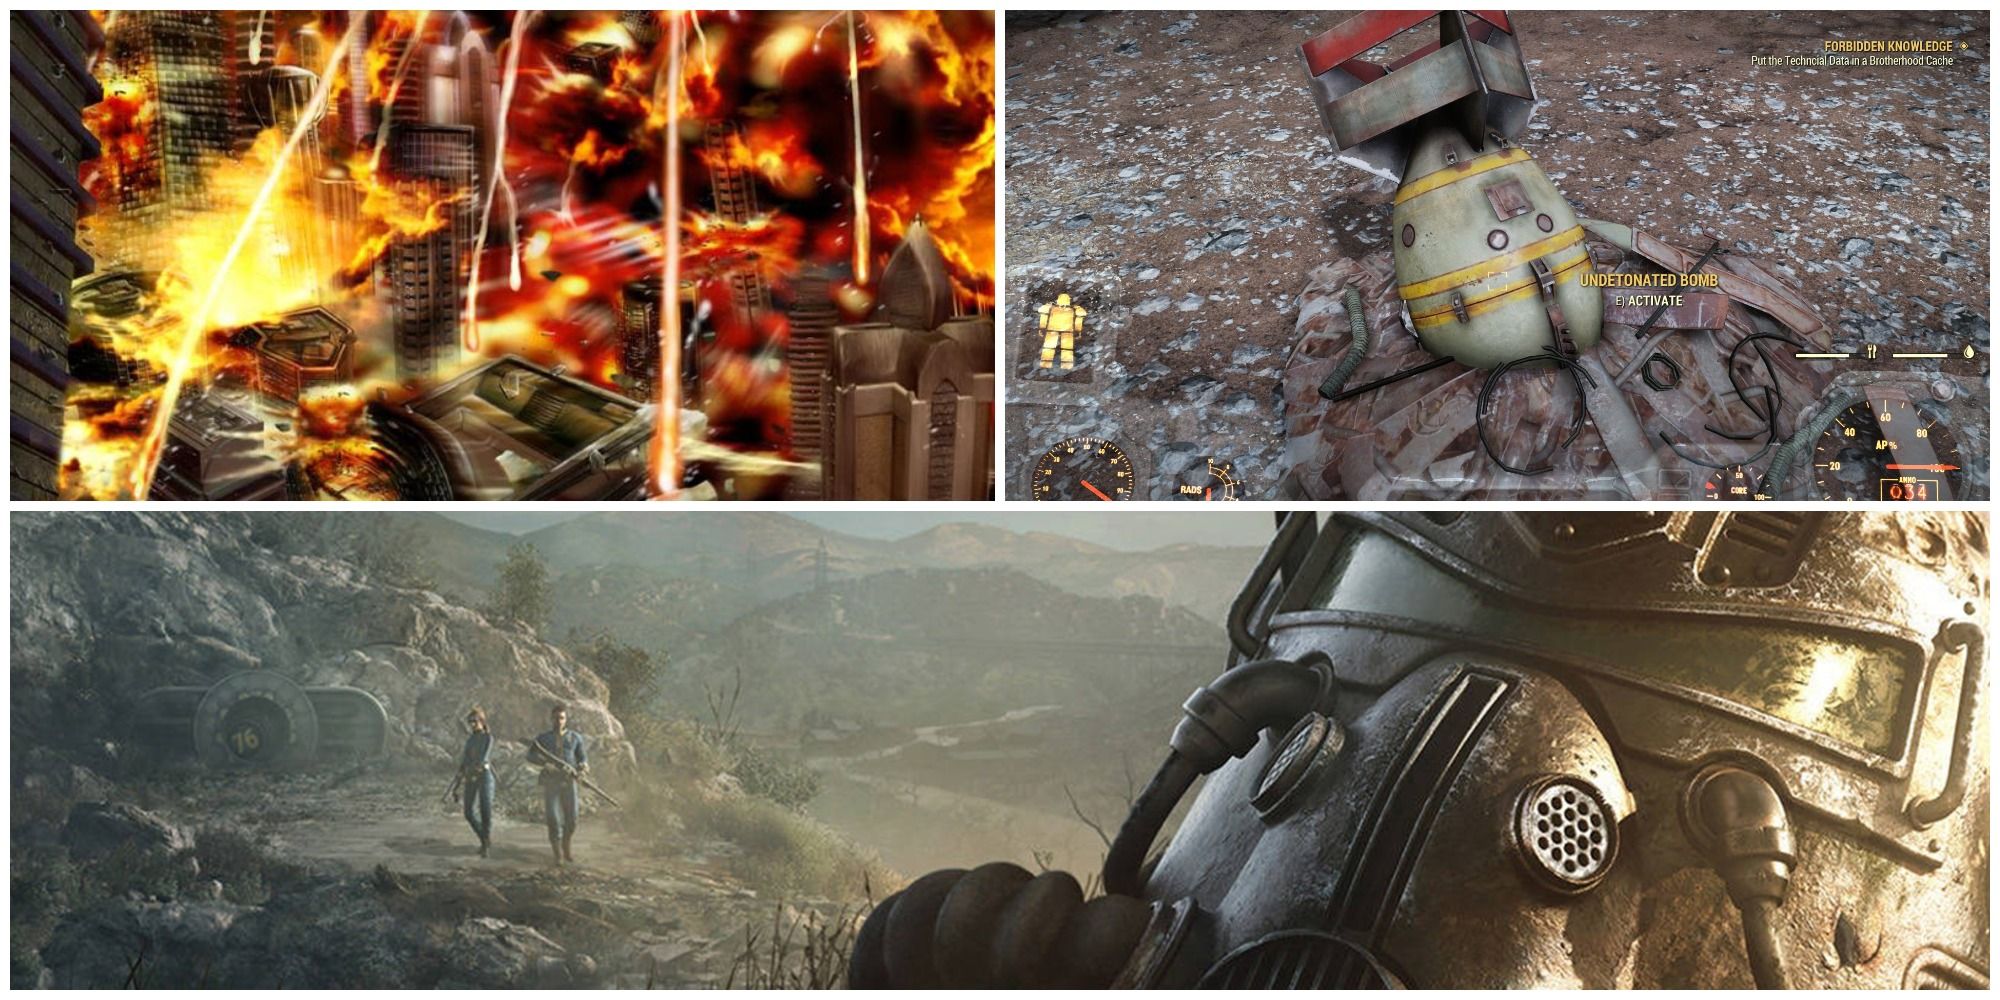 Fallout Header with throwback image top left, undetonated bomb top right, and fallout banner on bottom